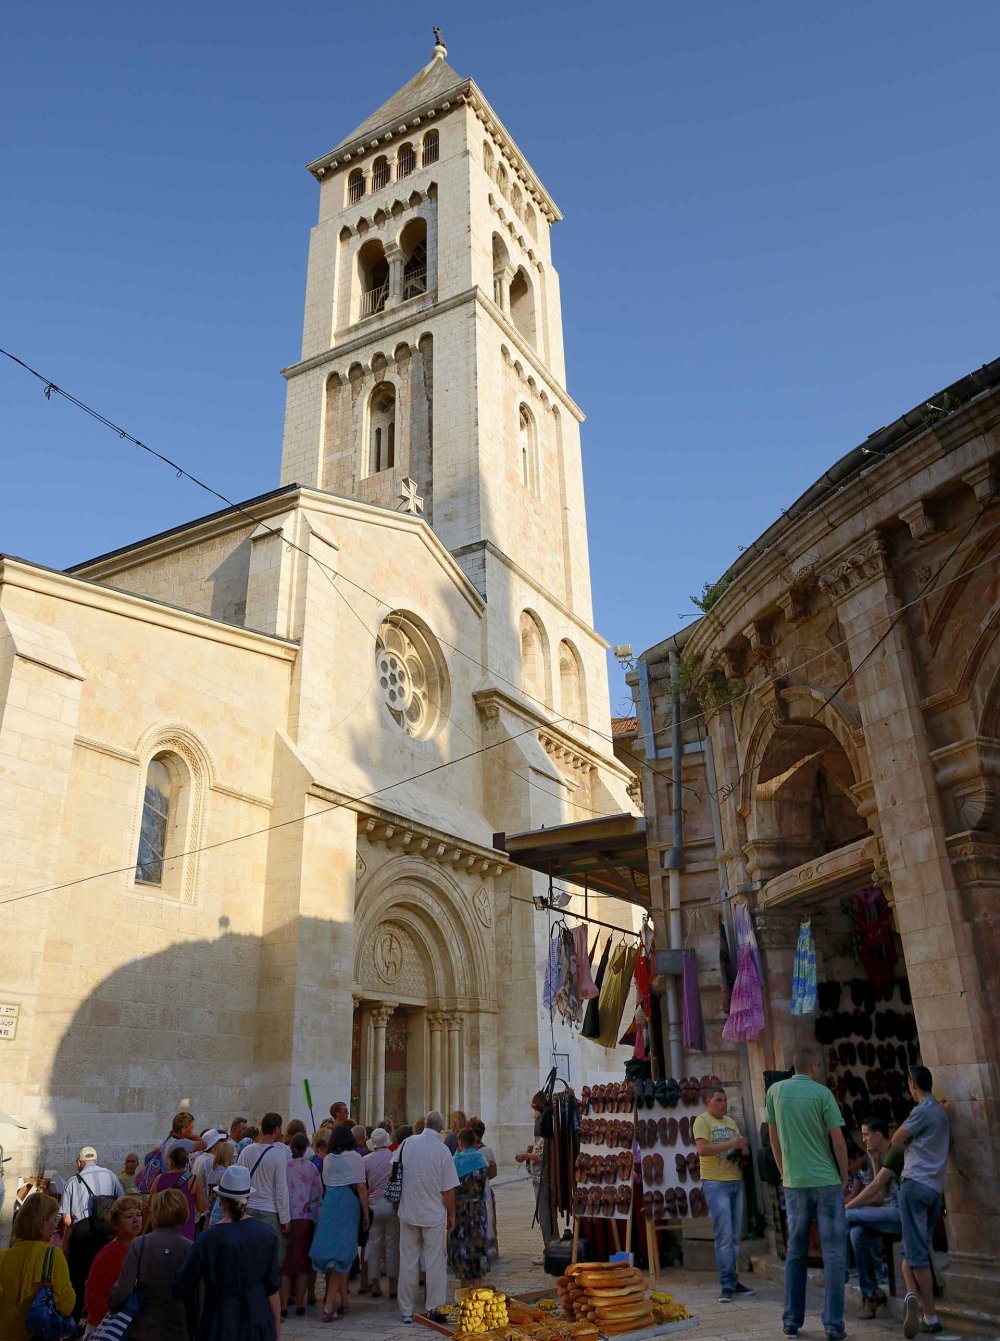 The Lutheran Church (Church of the Redeemer) in Jerusalem's Old City, May 20, 2014